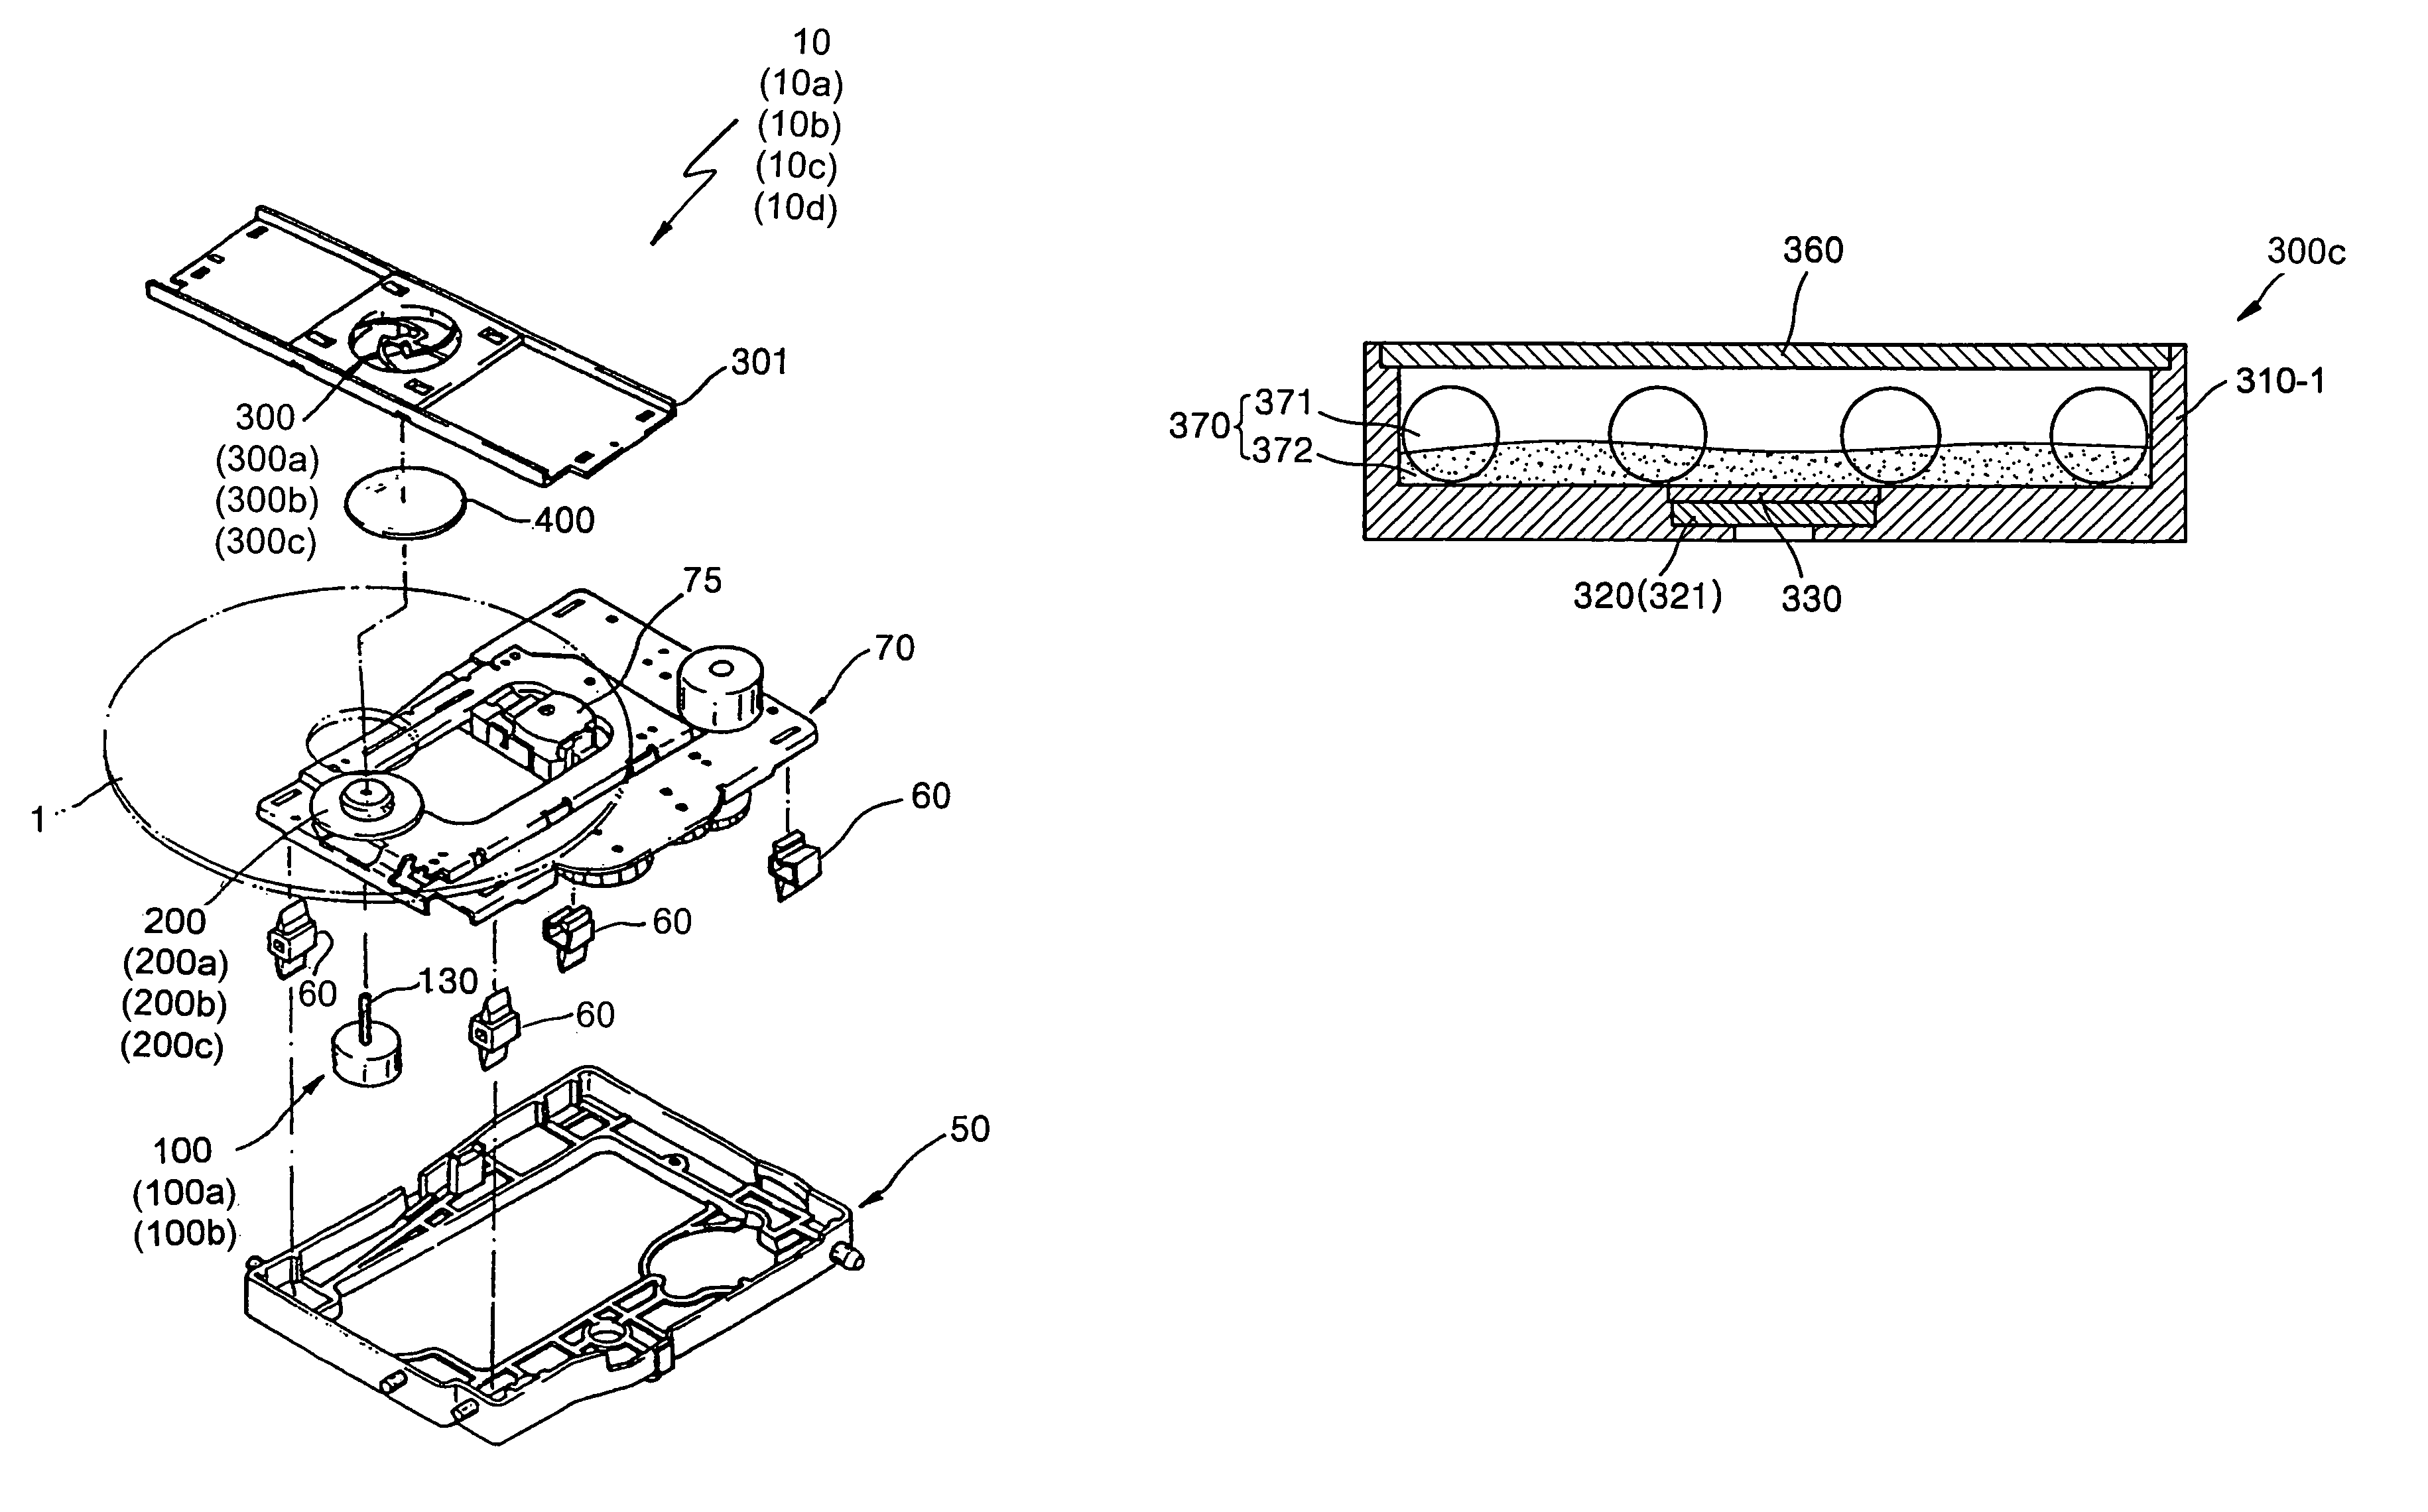 Disk player, and self-compensating-dynamic-balancer (SCDB) integrated turntable, SCDB integrated clamper and SCDB integrated spindle motor employed in the same